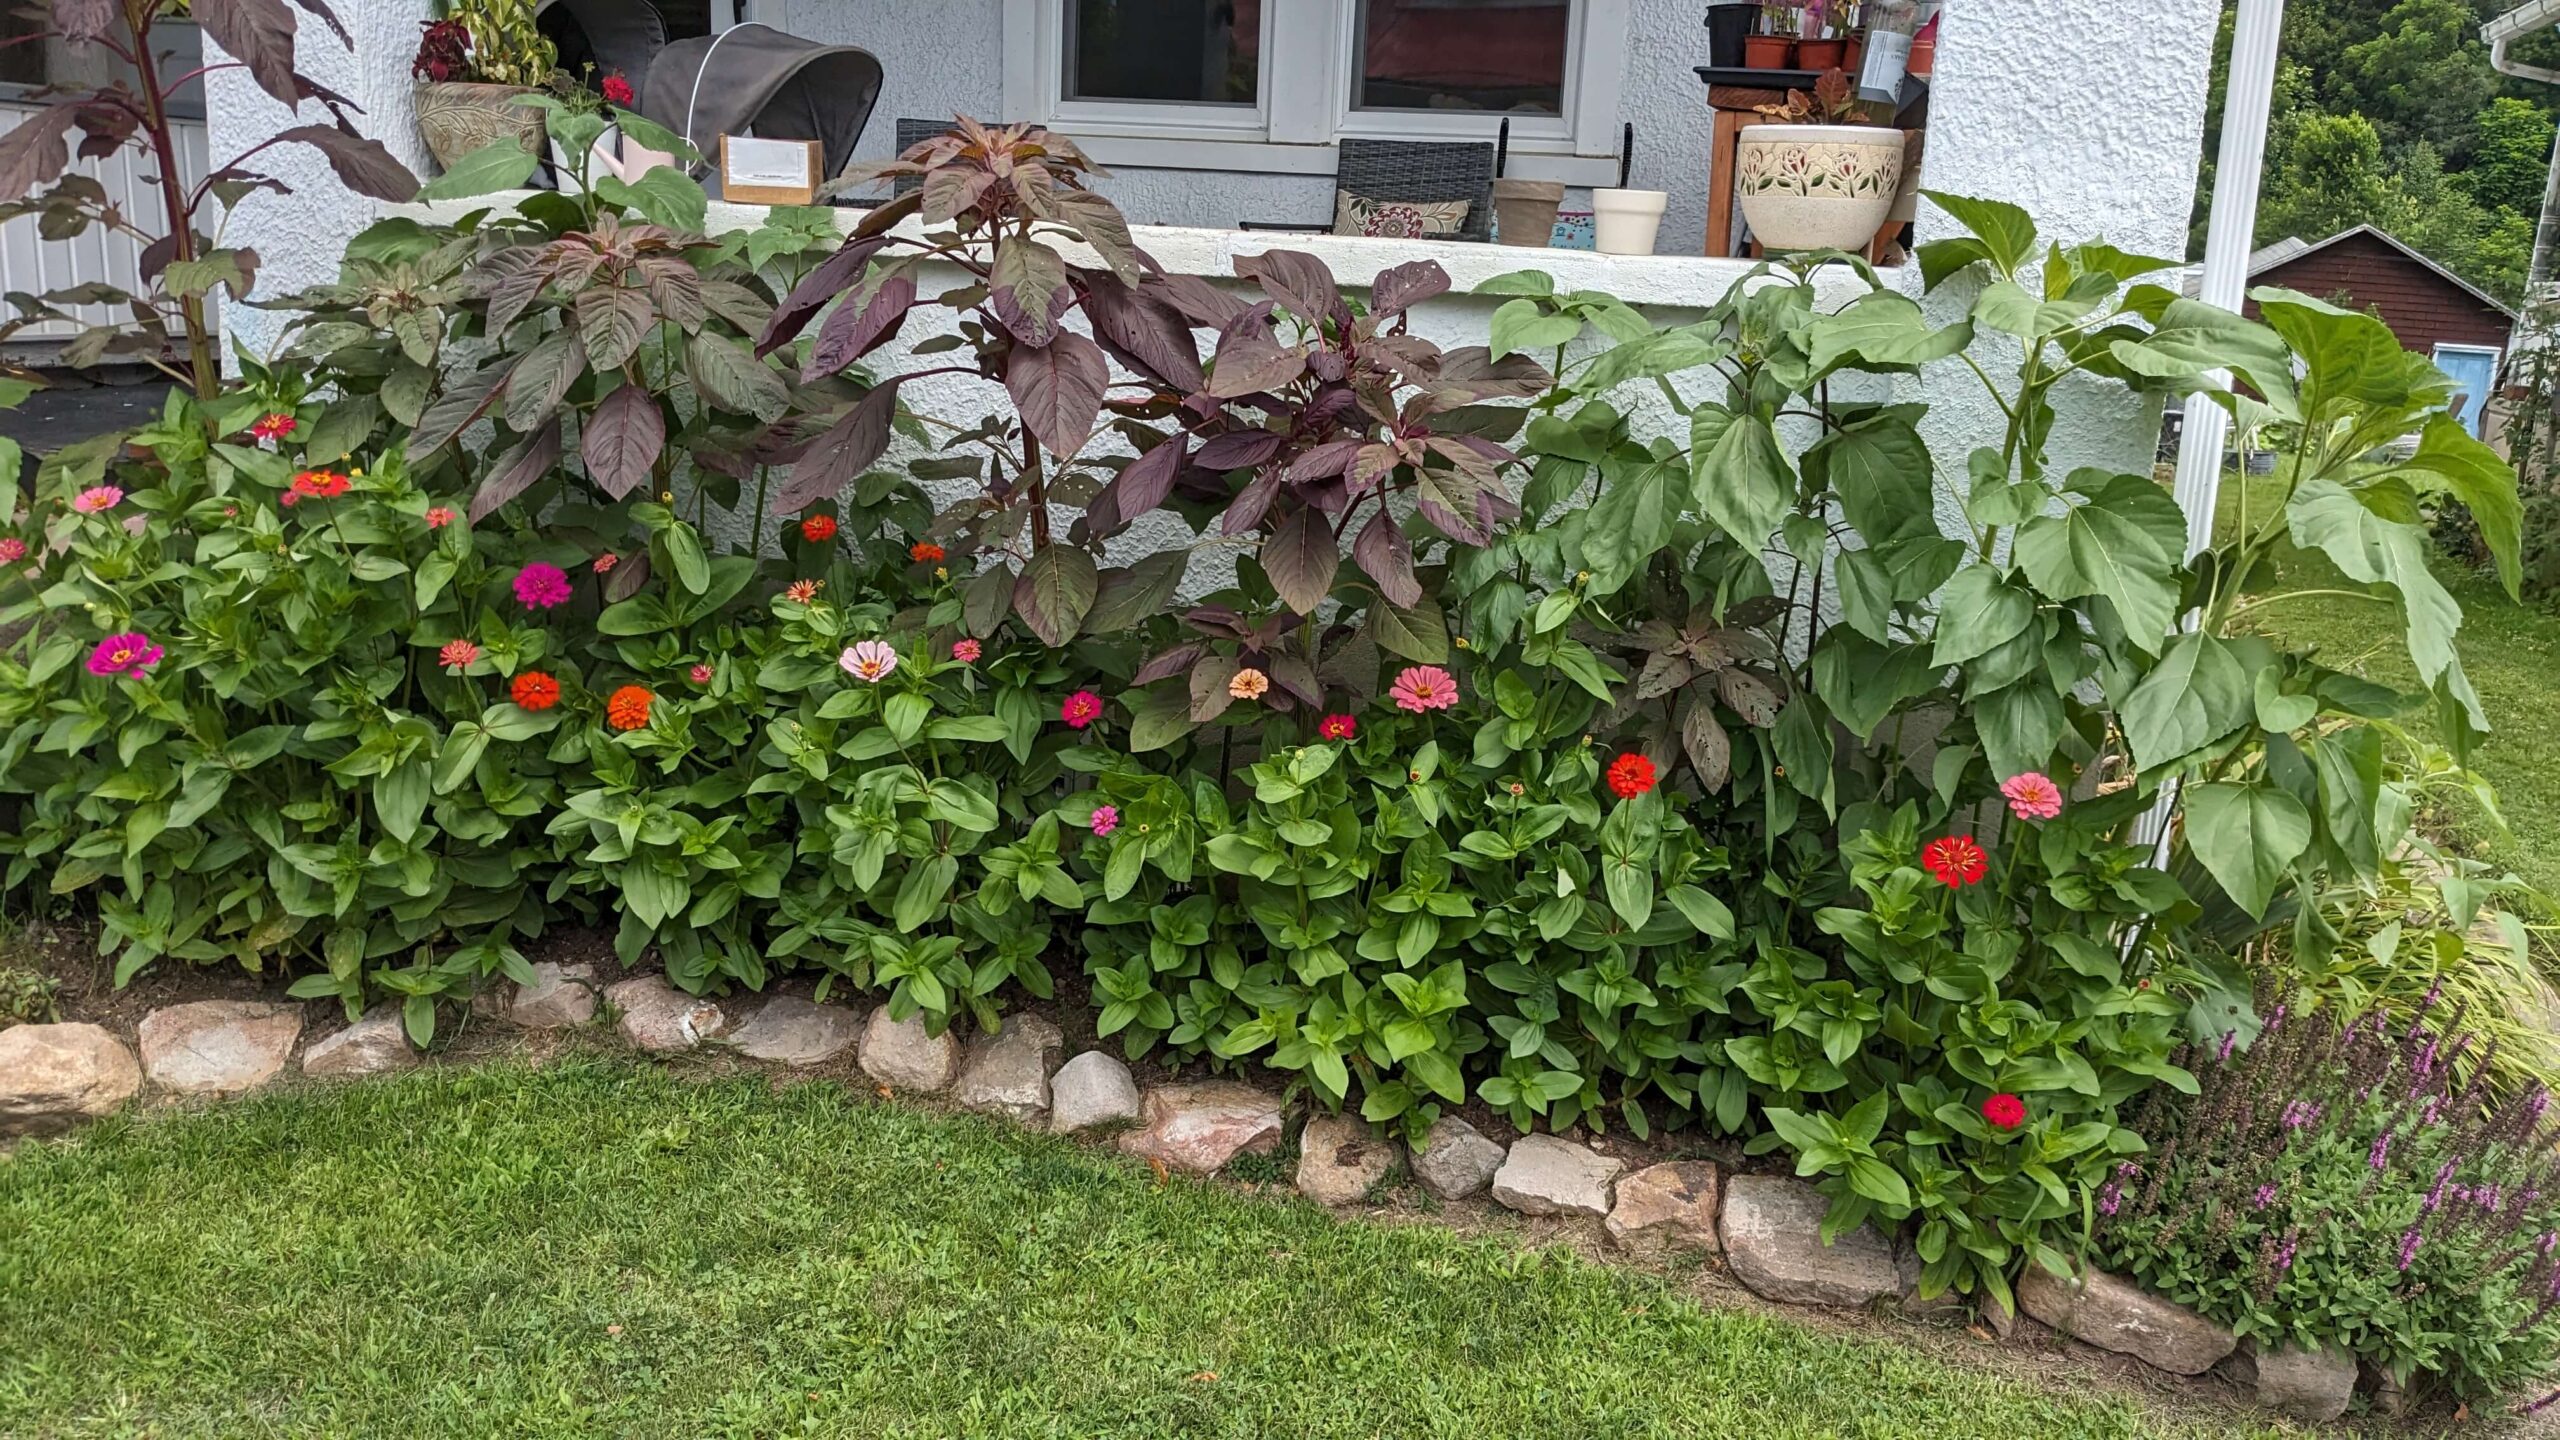 a rock lined garden bed against a house with zinnia flowers and plants that are well established